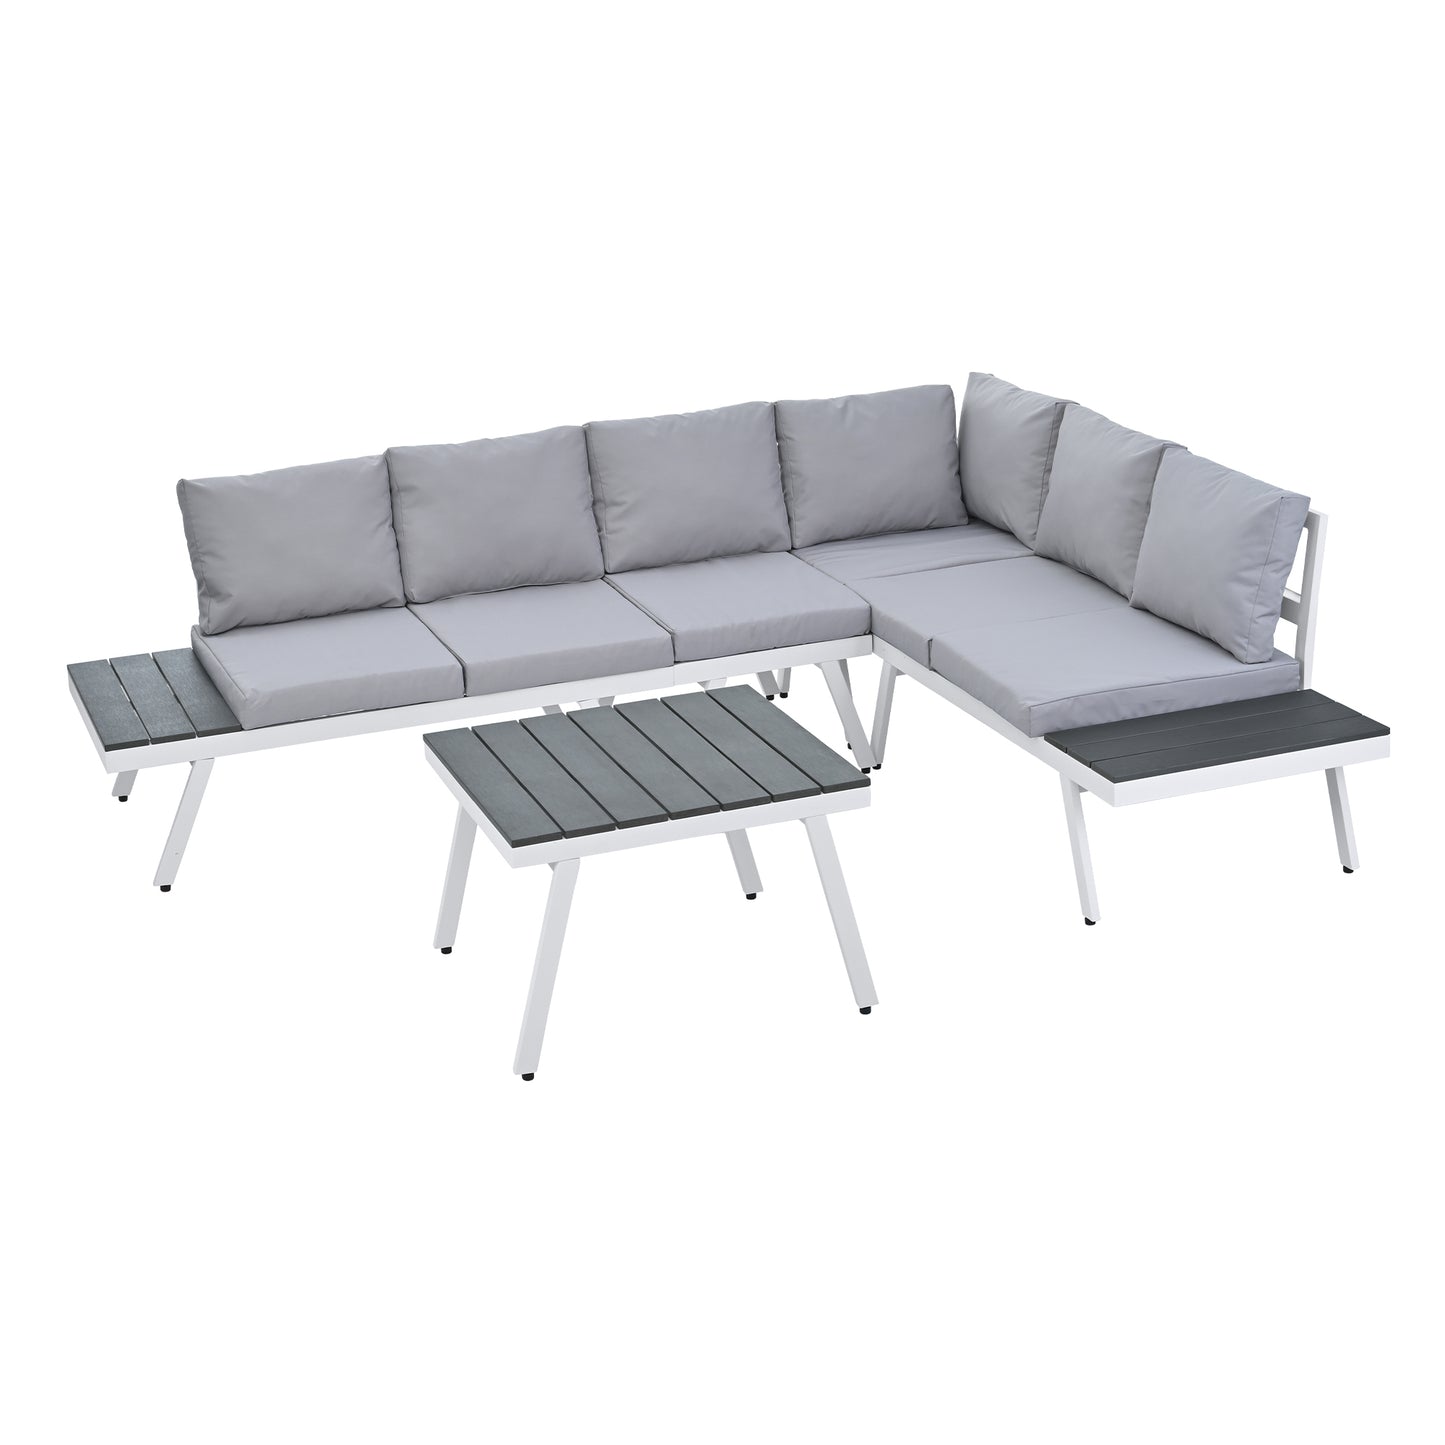 TOPMAX Industrial 5-Piece Aluminum Outdoor Patio Furniture Set, Modern Garden Sectional Sofa Set with End Tables, Coffee Table and Furniture Clips for Backyard, White+Grey